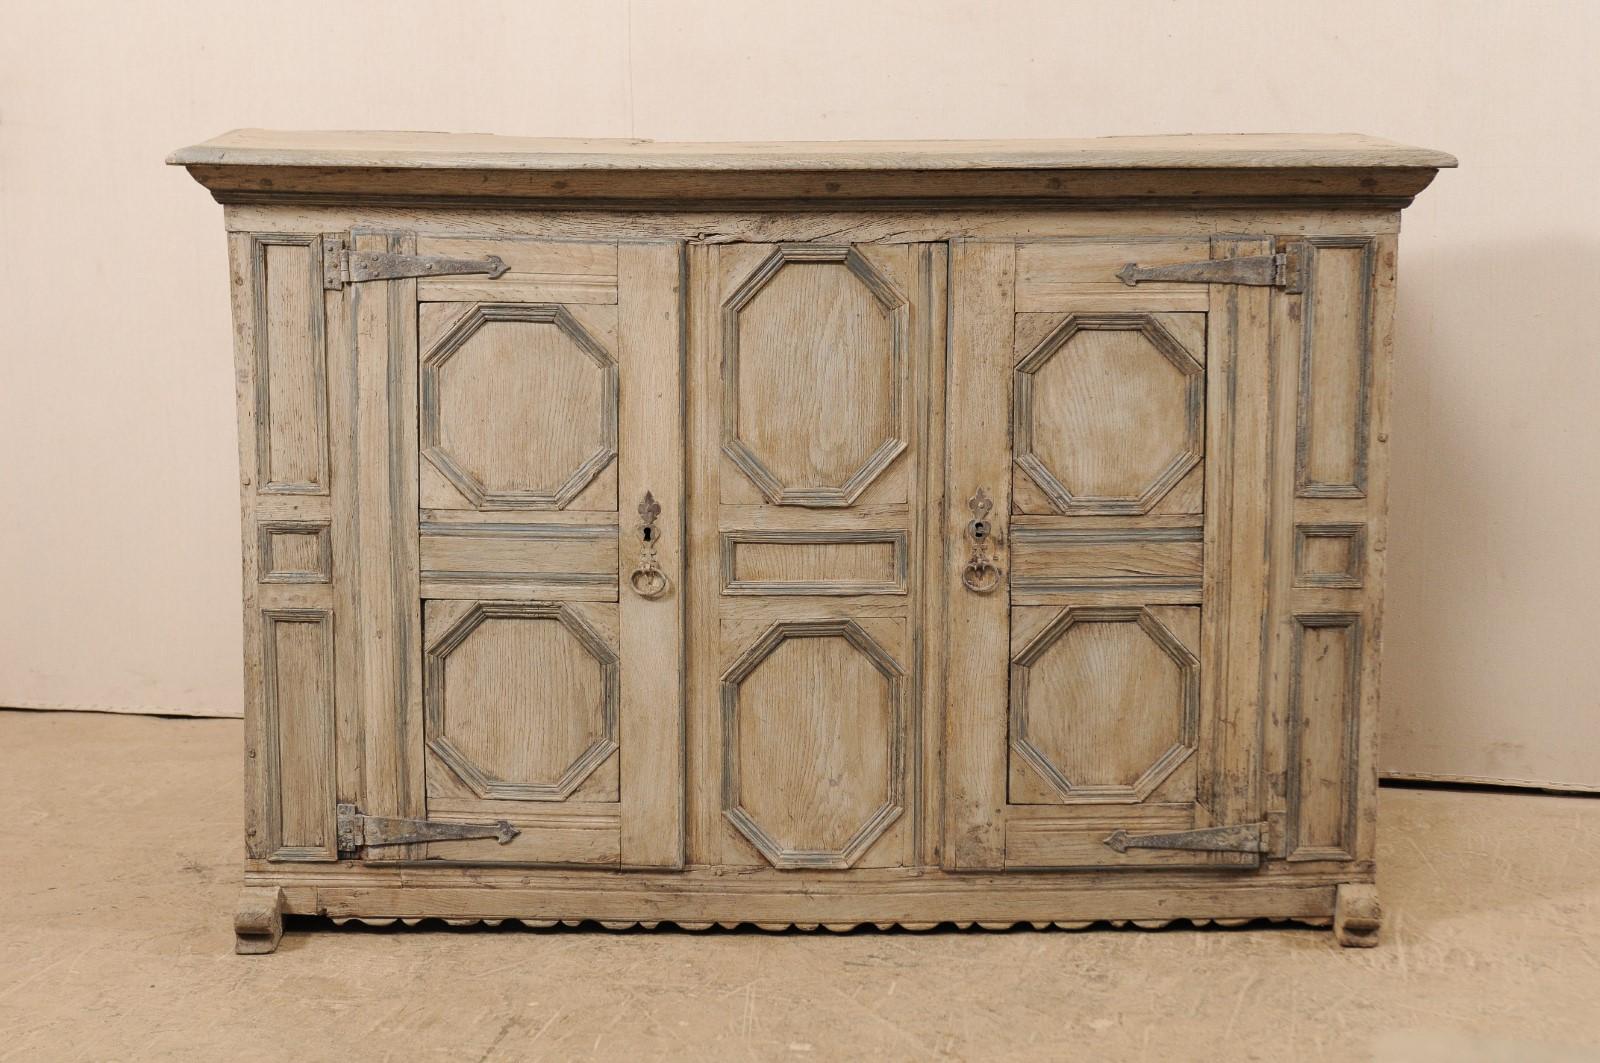 An 18th century German carved wood cabinet with geometric designs. This antique chest from Germany features a wood case with two doors heavily carved in geometric patterns, of octagonal and rectangular-shaped panels across the front side, a nicely